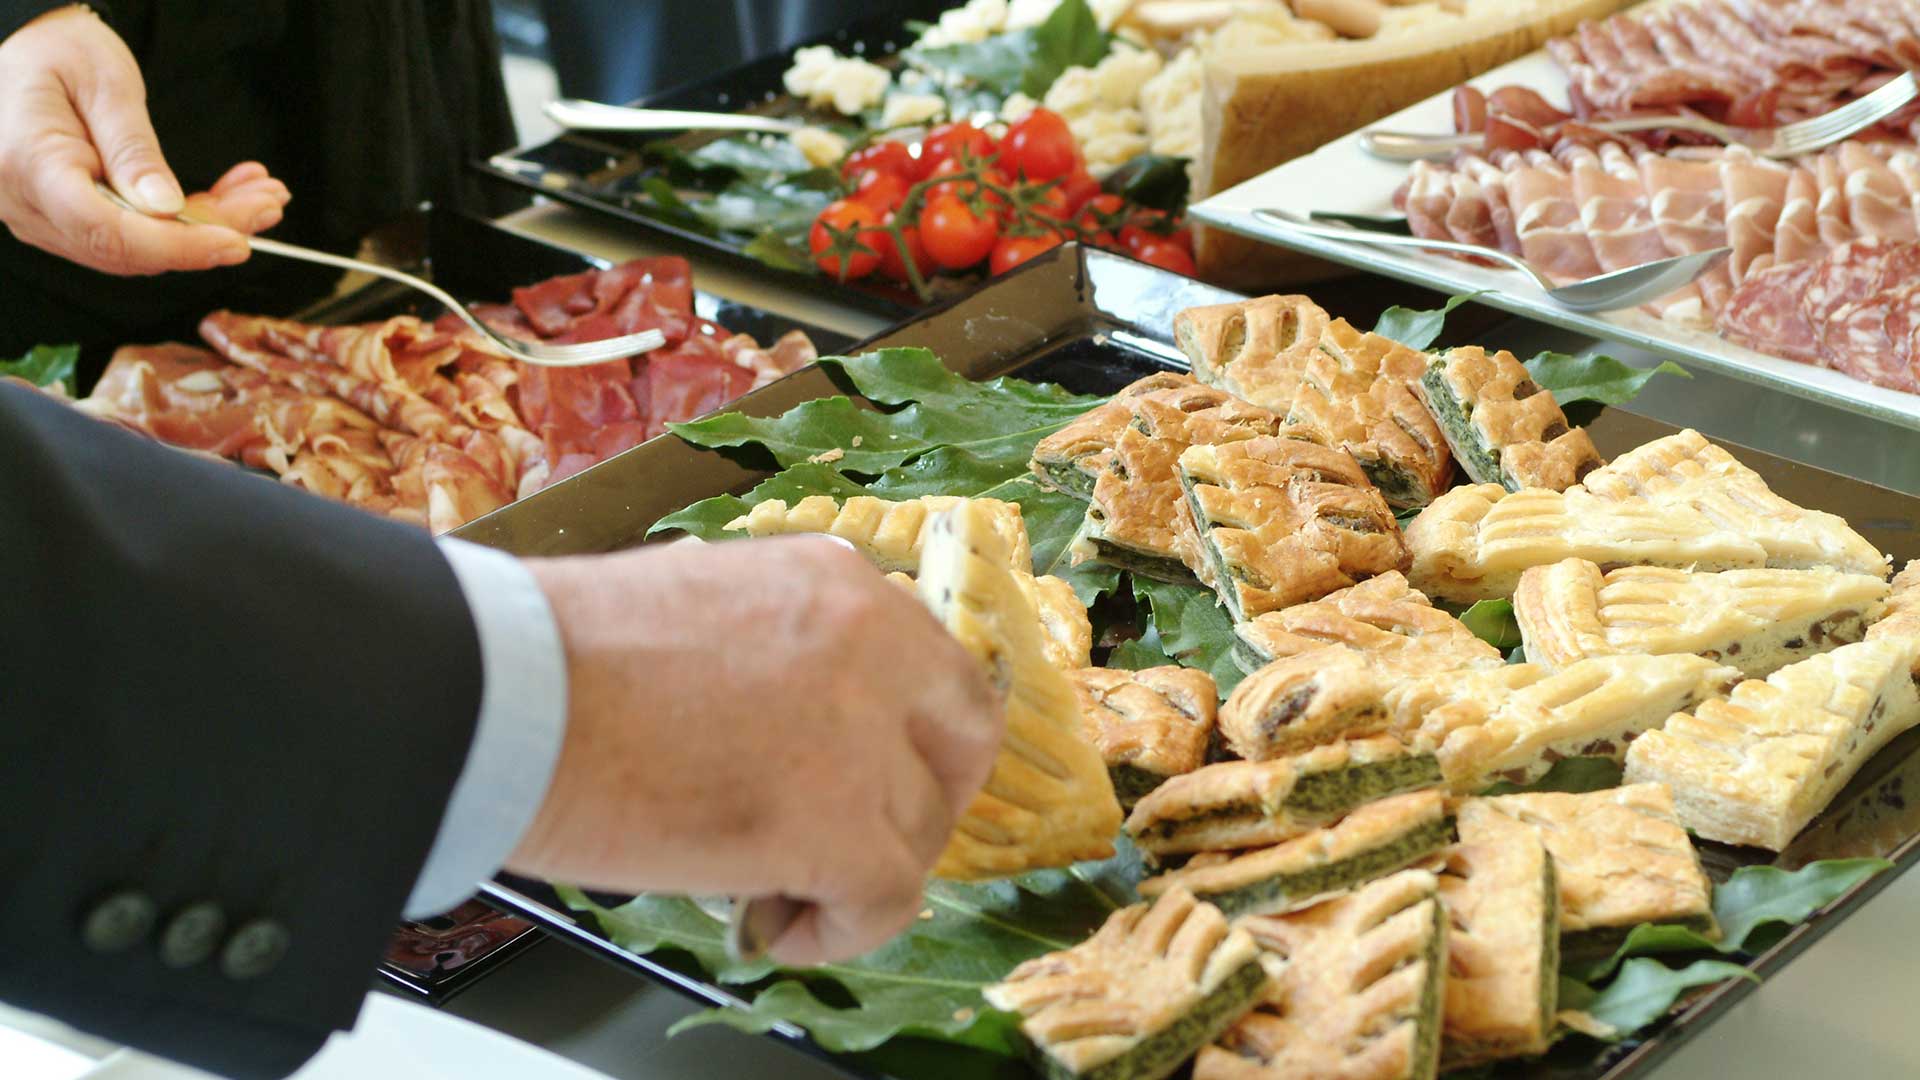 Save on corporate catering